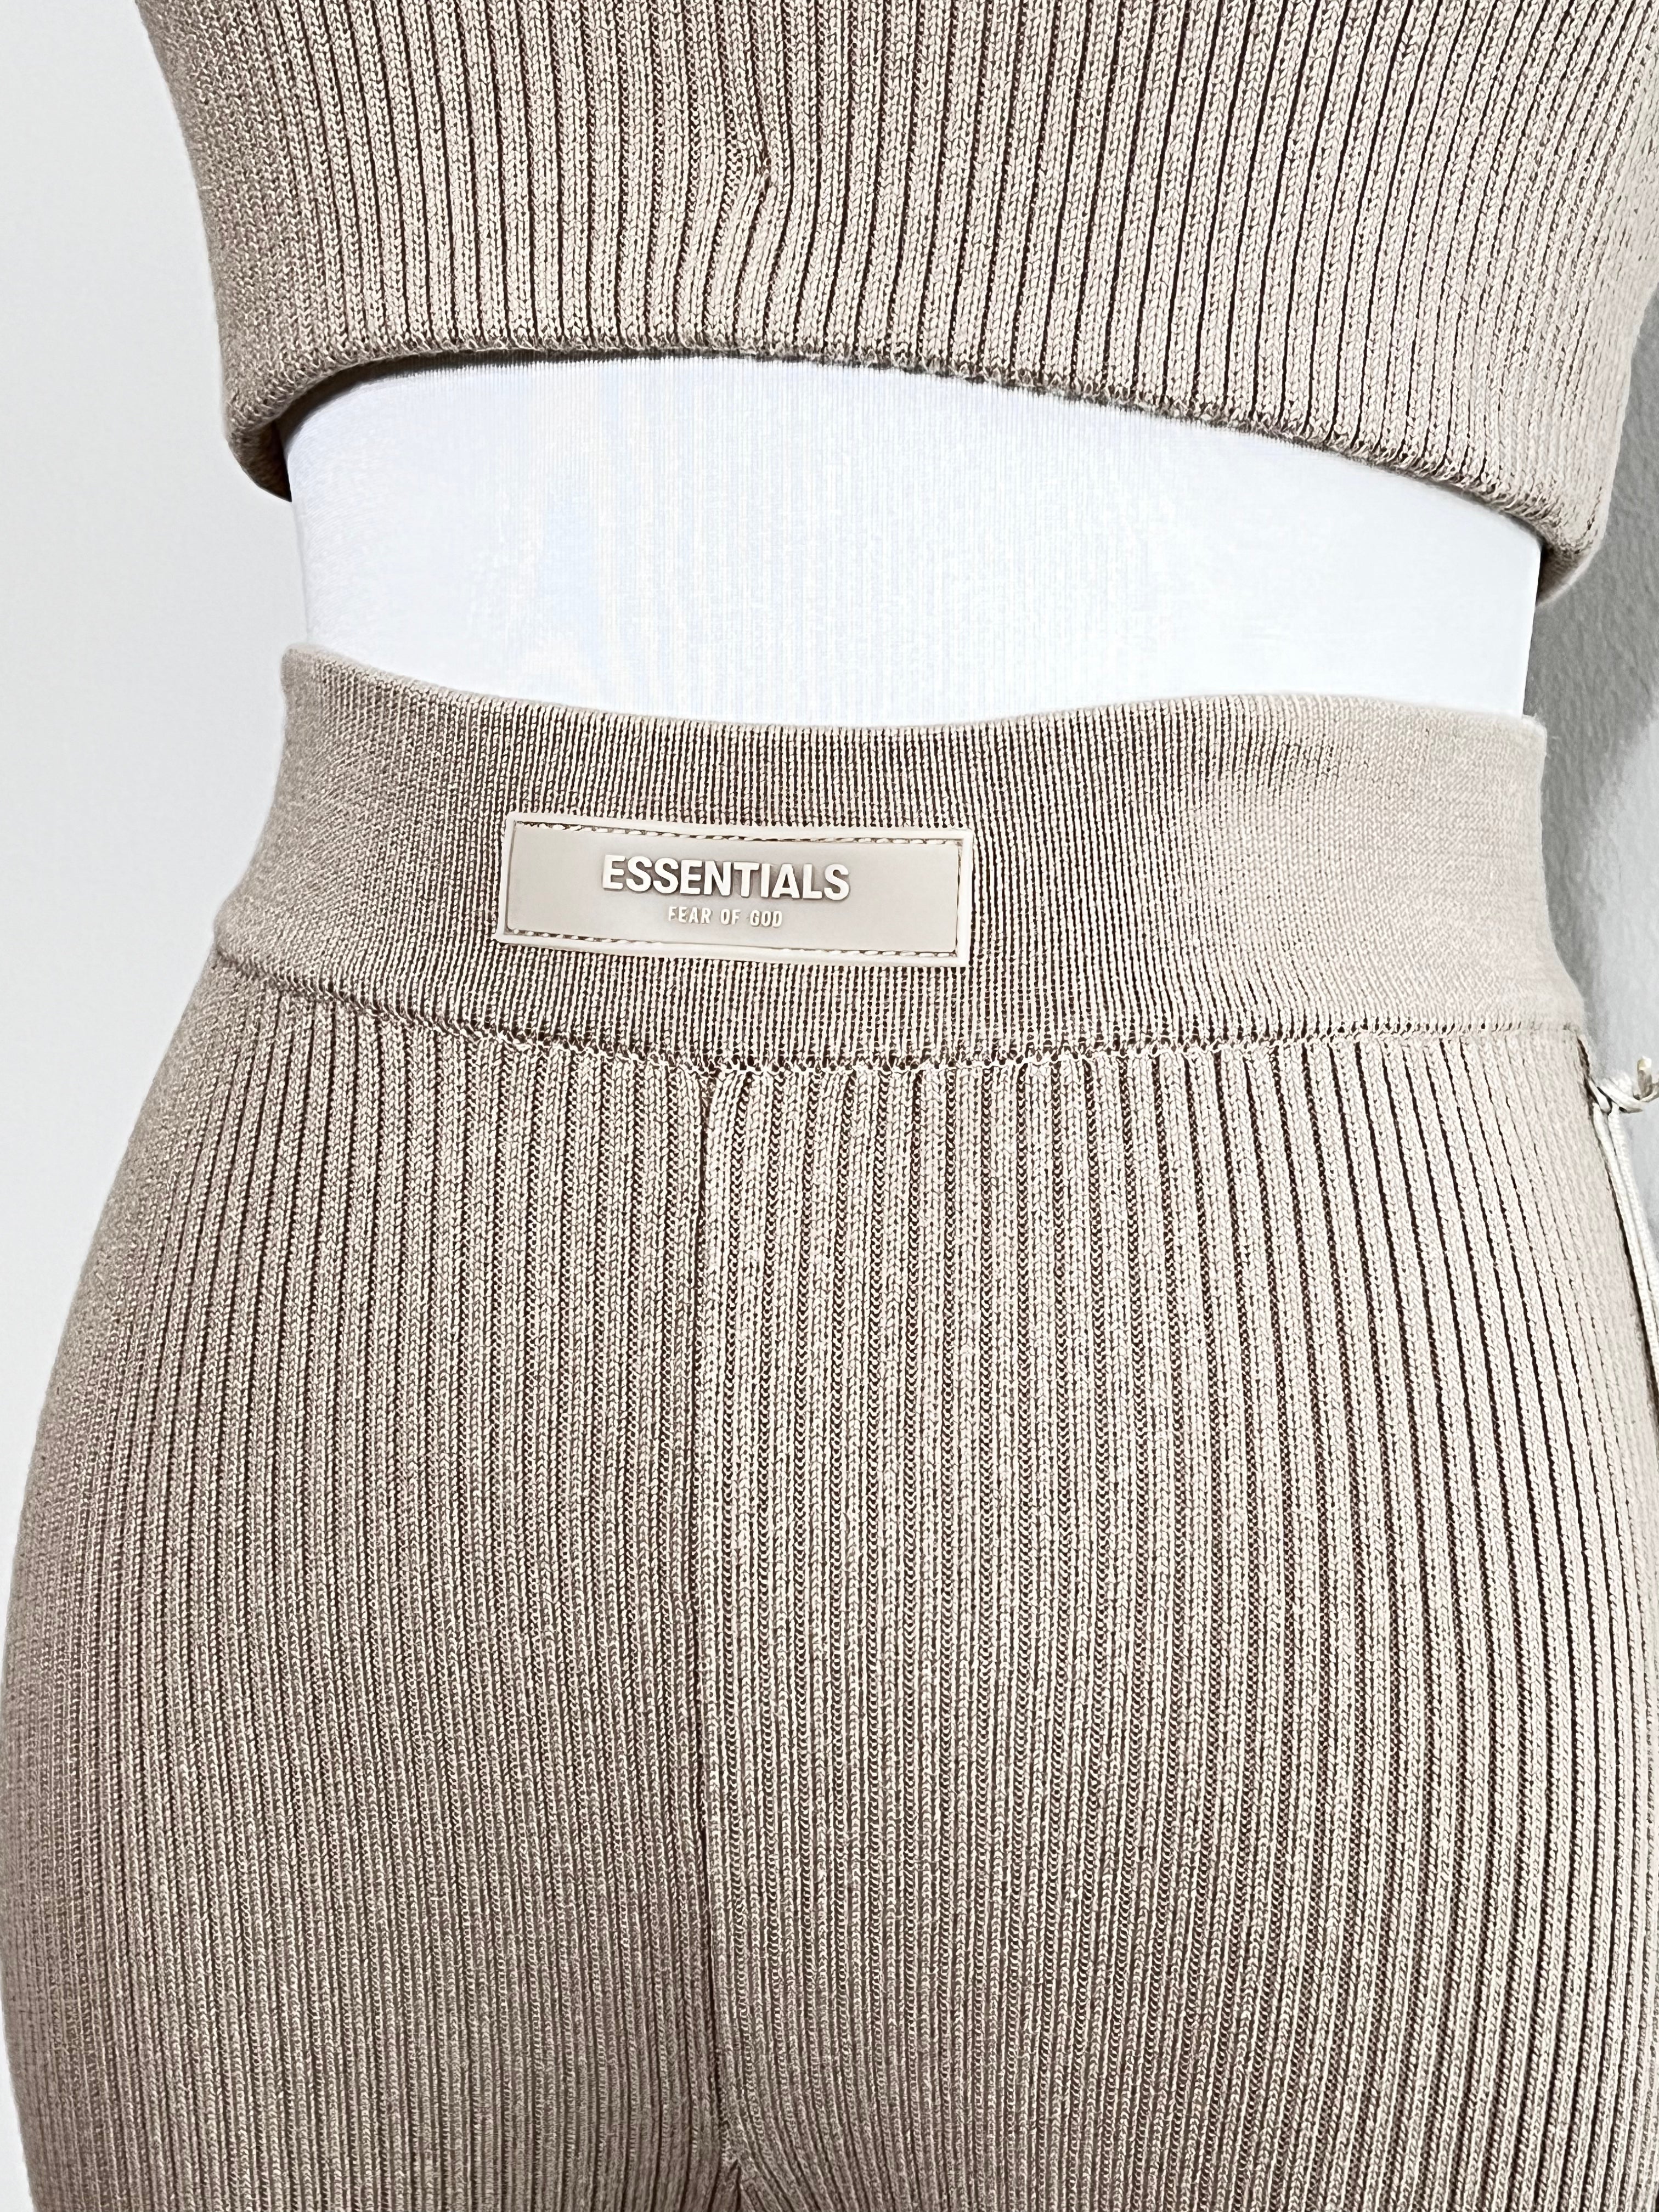 A set of knit elastic waistband with logo patch at front sports ribbed pants and sleevless crop in seal nude color - FEAR OF GOD ESSENTIALS